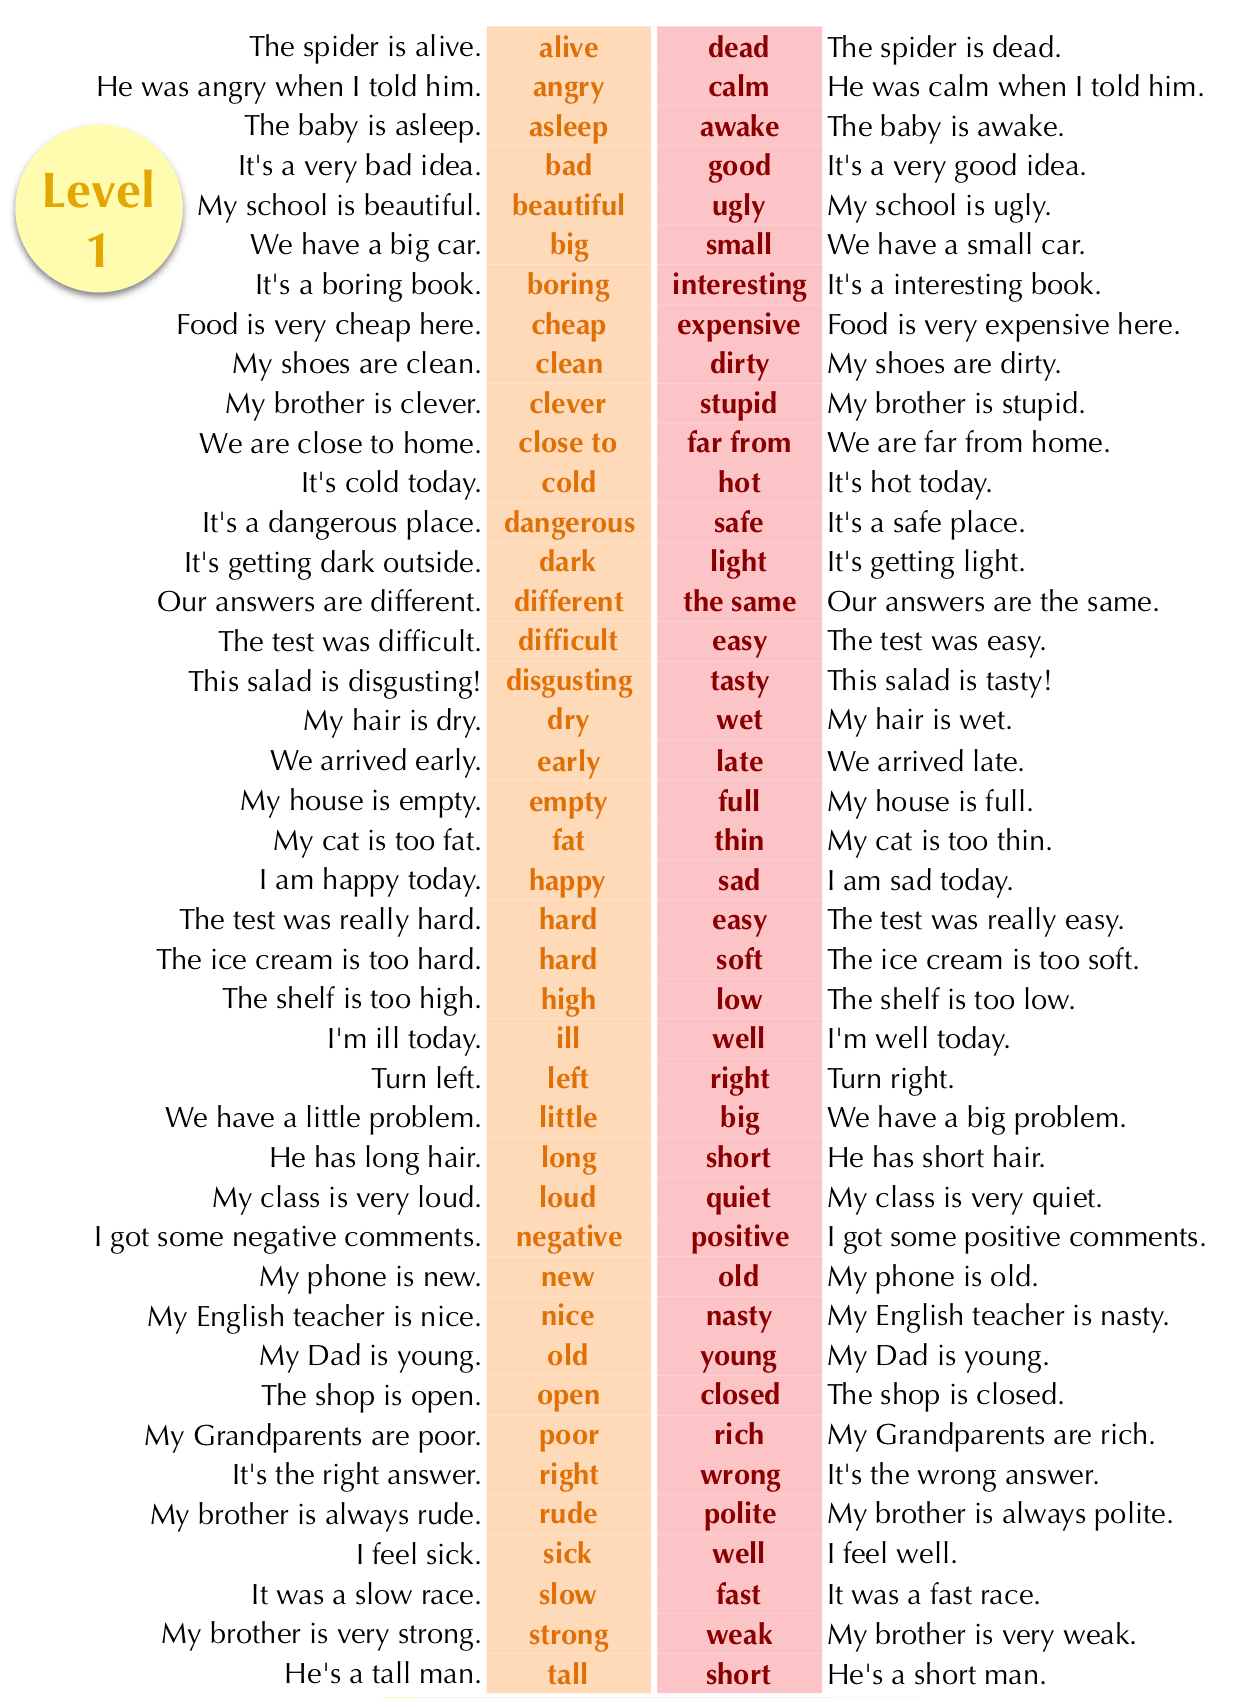 adjectives-and-opposites-lists-in-english-pdf